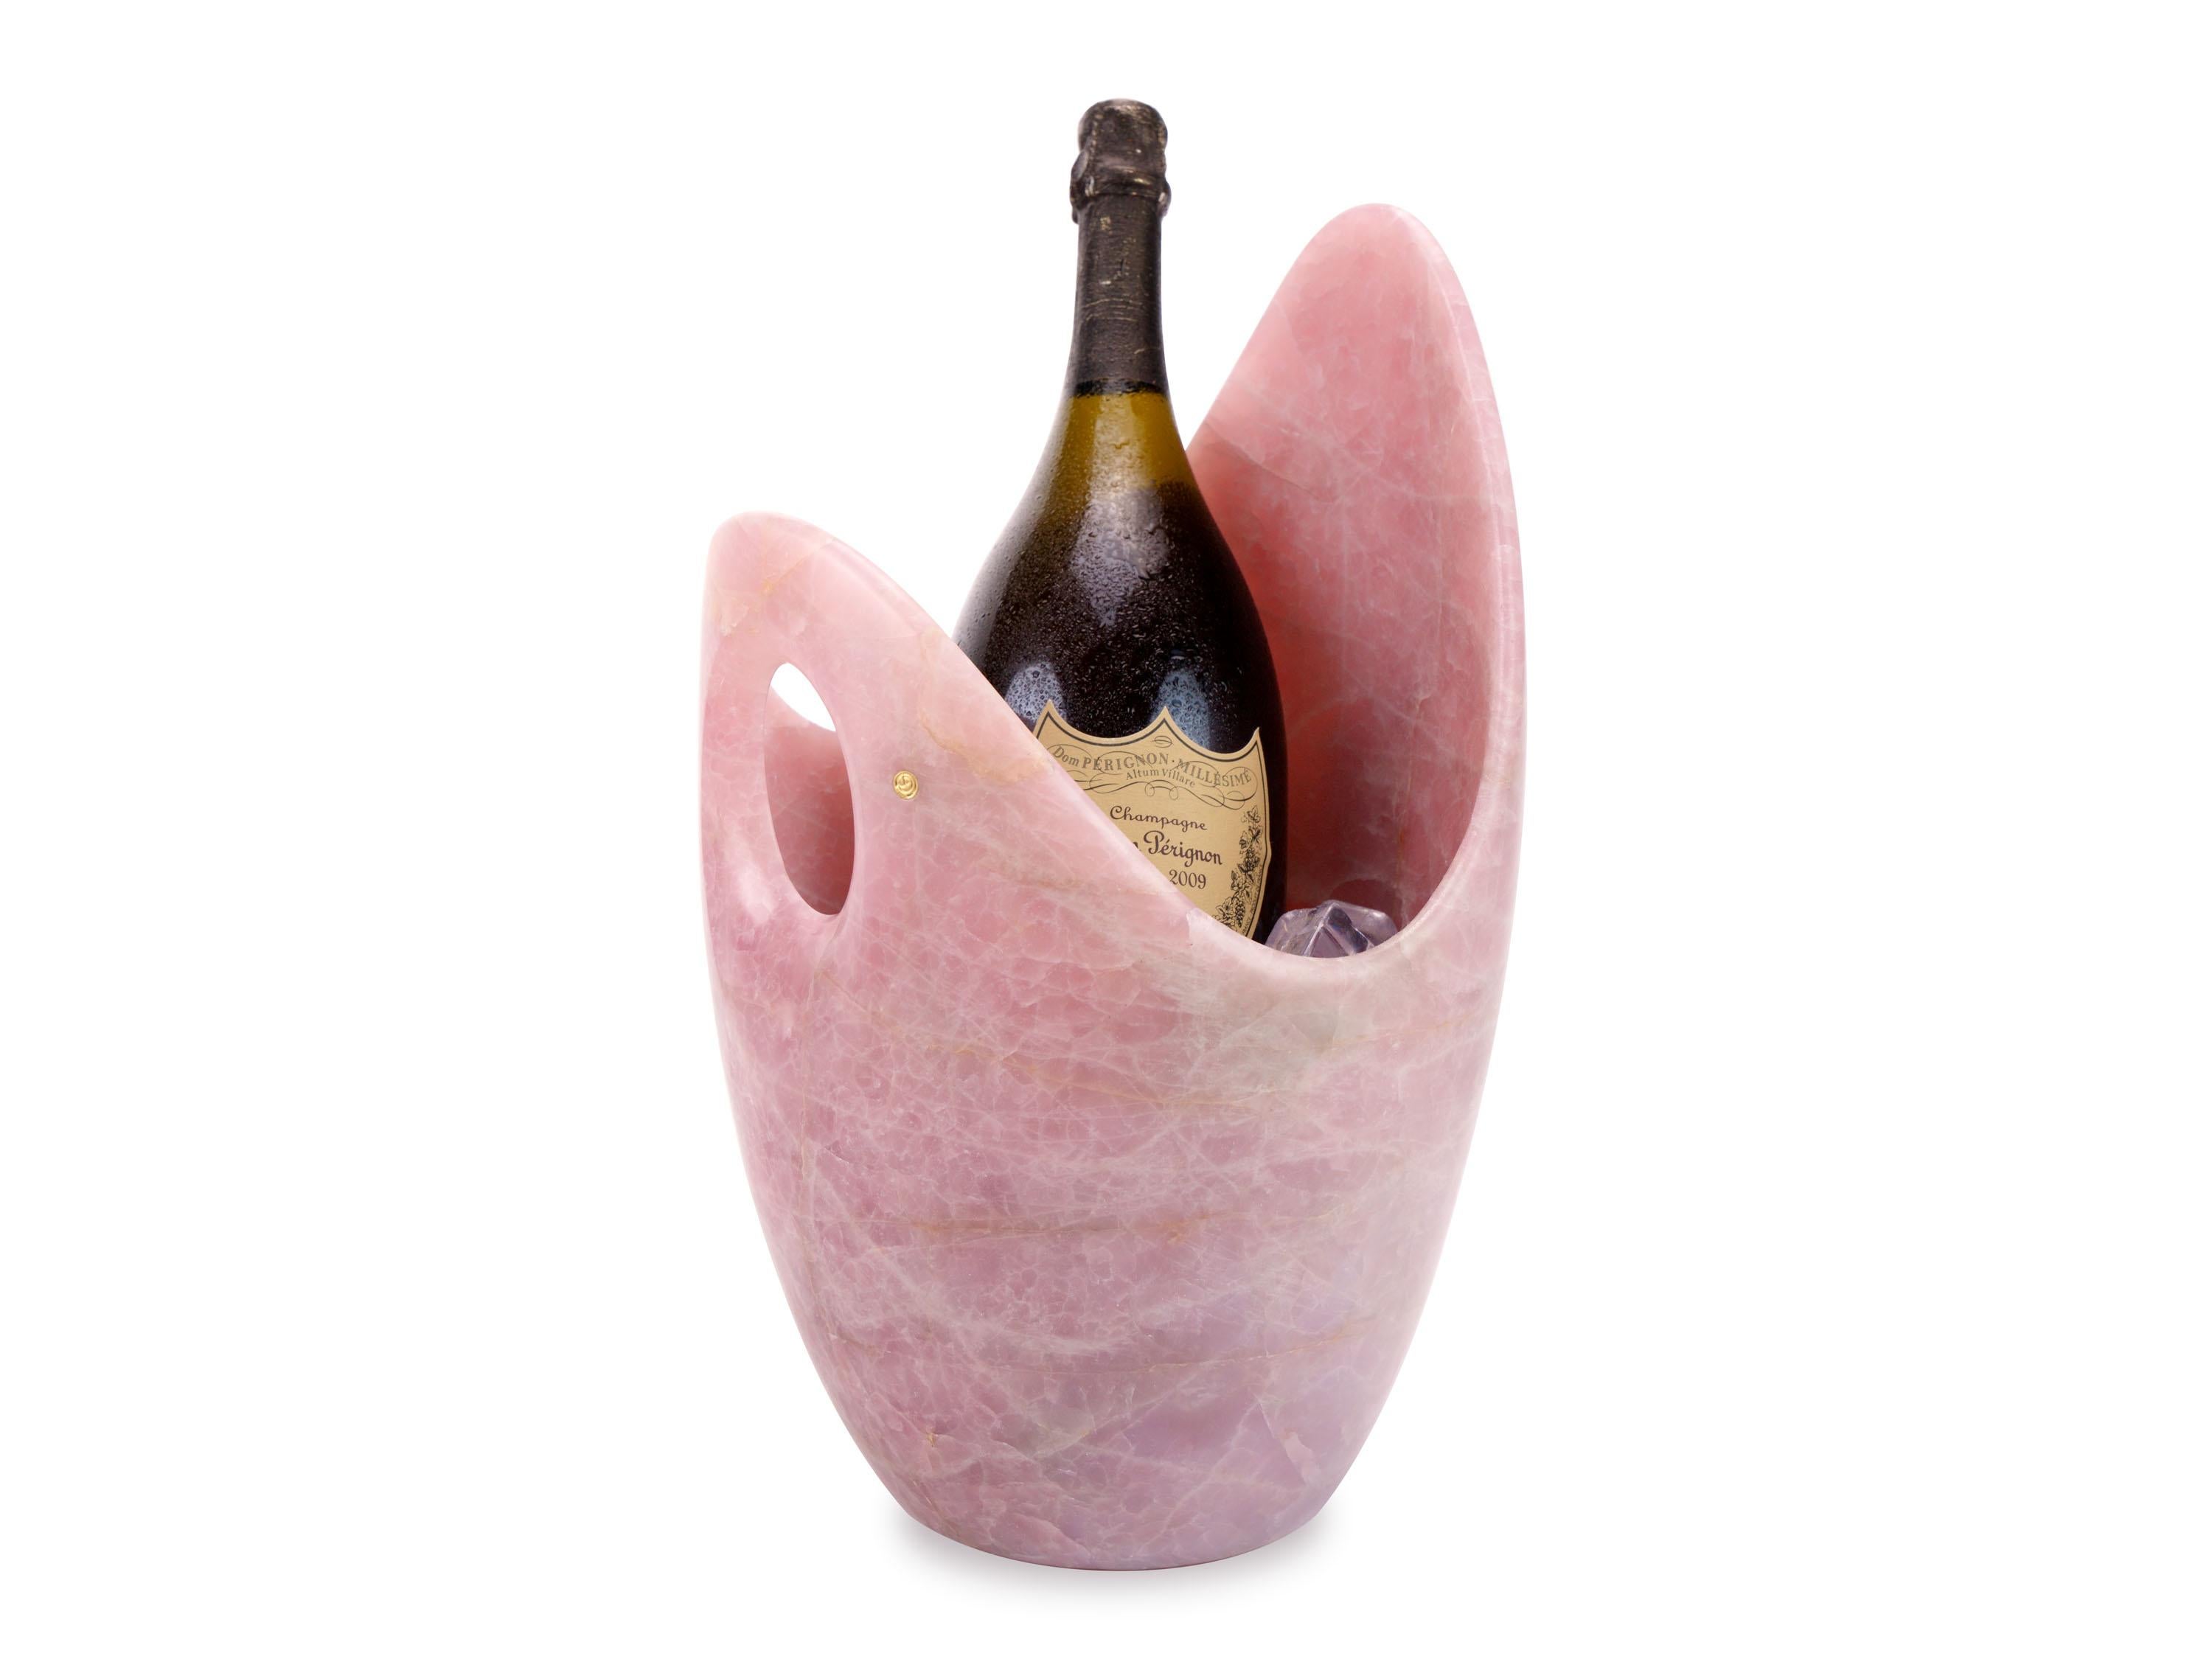 Luxurious and big Champagne bucket sculpted by hand from a solid block of Rose Quartz. Polished finishing.

Champagne bucket dimensions: D 26 x  H 41 cm. Available in different quartzite, onyx and marbles. 

Limited edition of 50.

Each champagne